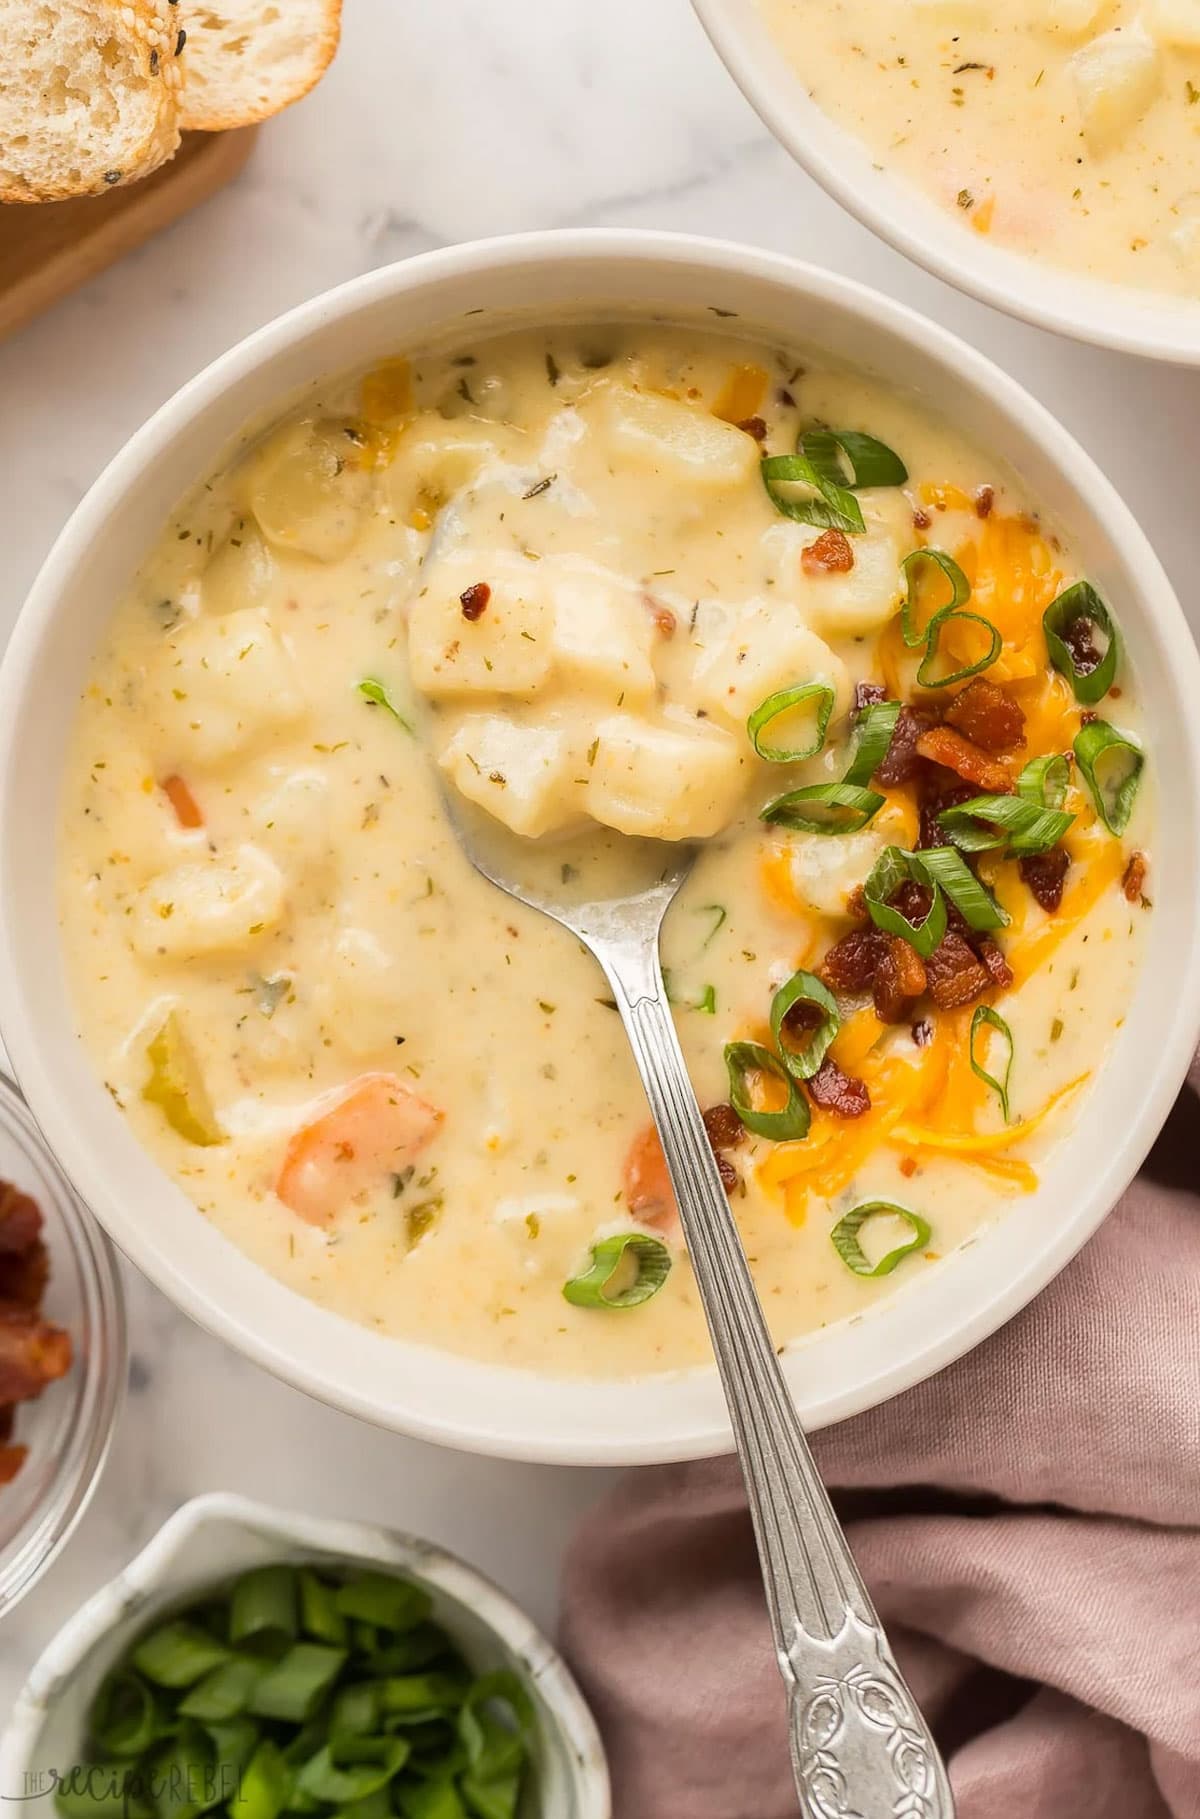 Creamy potato soup recipe in a bowl with bacon, green onions and cheddar cheese